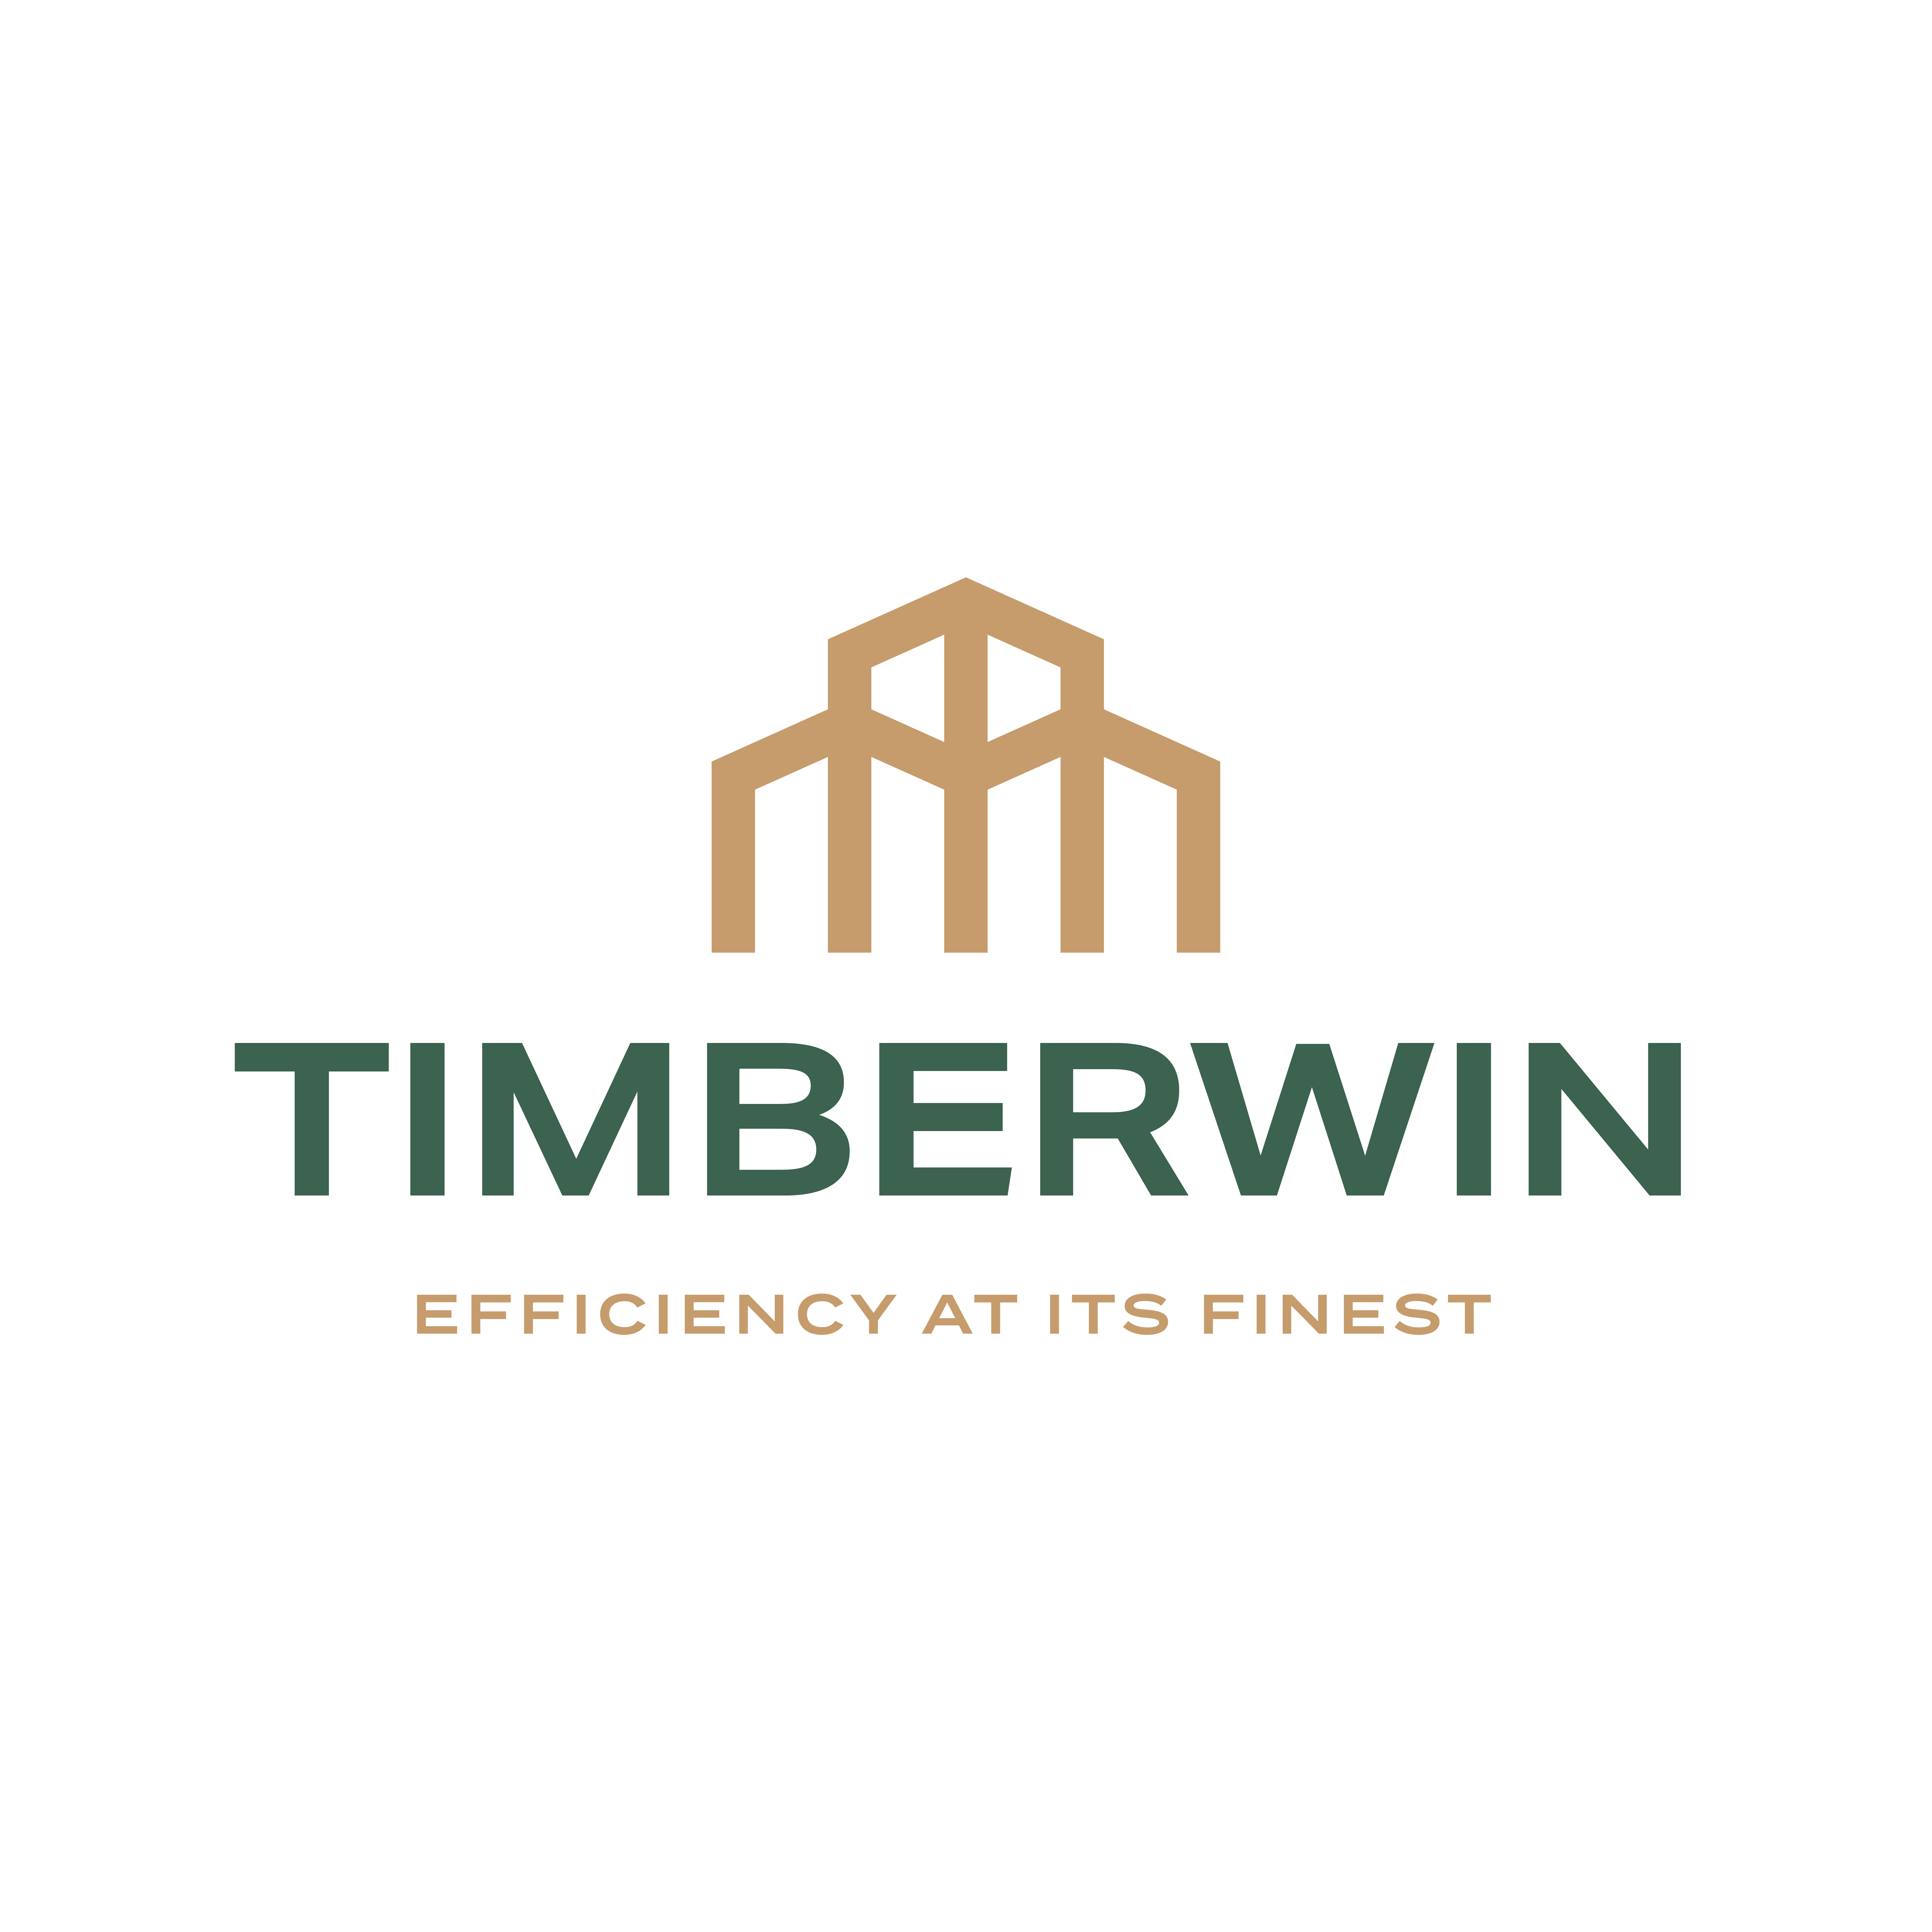 Logo of Timberwin Joinery Manufacturers In Epping, Essex